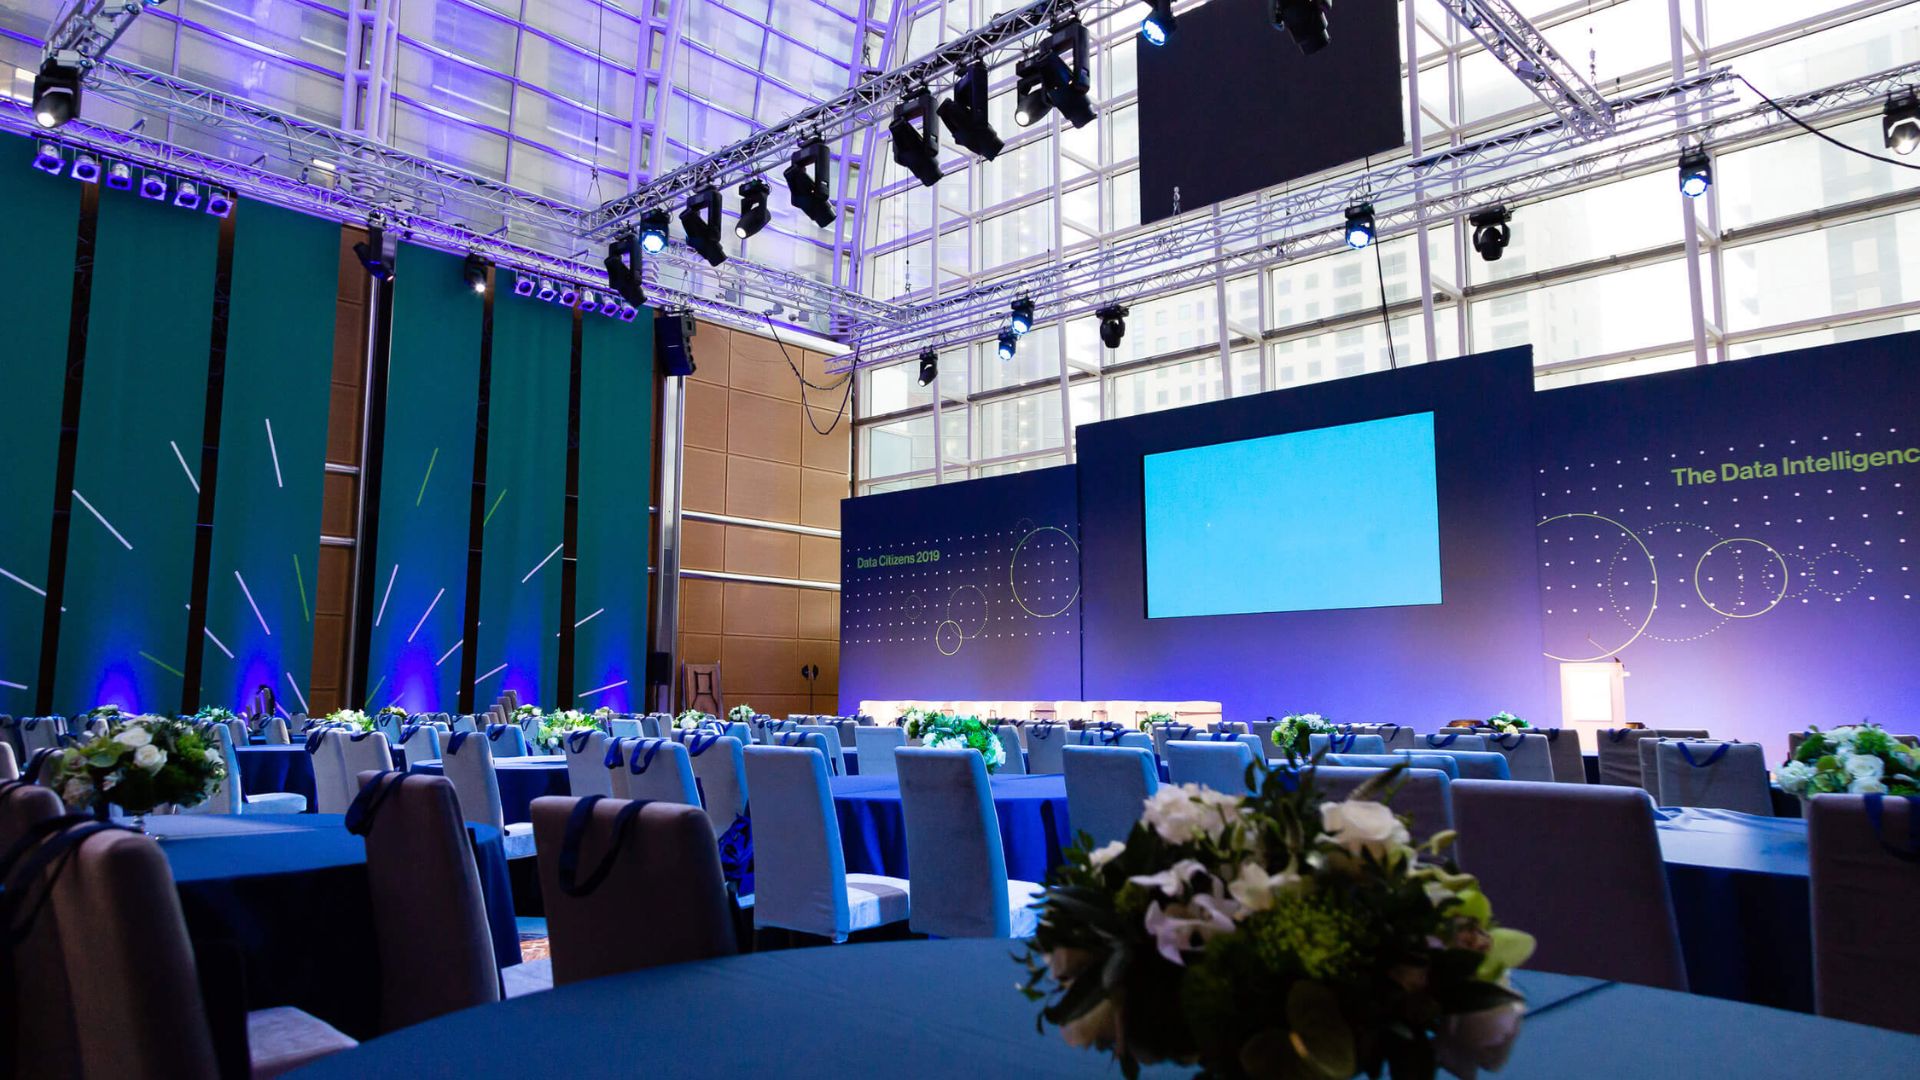 Benefits of Hiring a Professional Corporate Events Company in Dubai